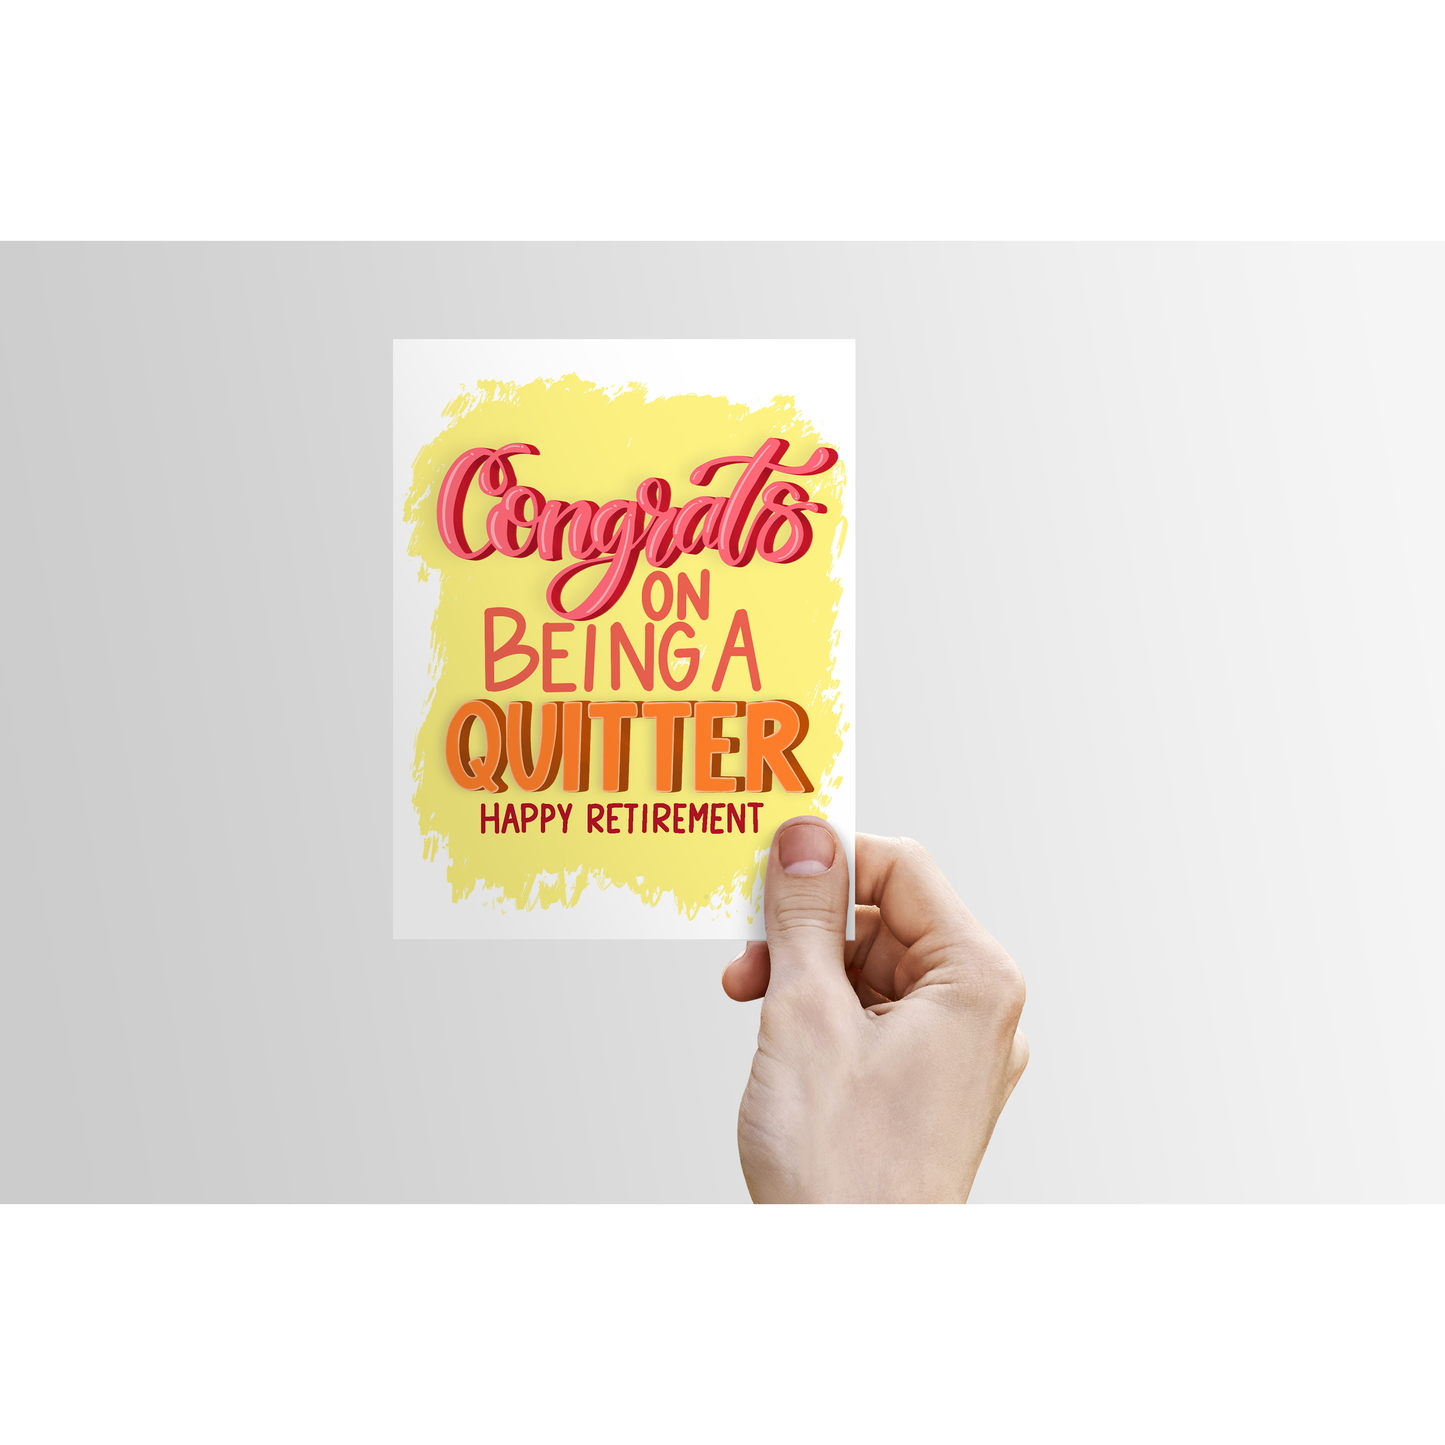 Congrats on Being a Quitter - Greeting Card | funny card, retiring, congratulations